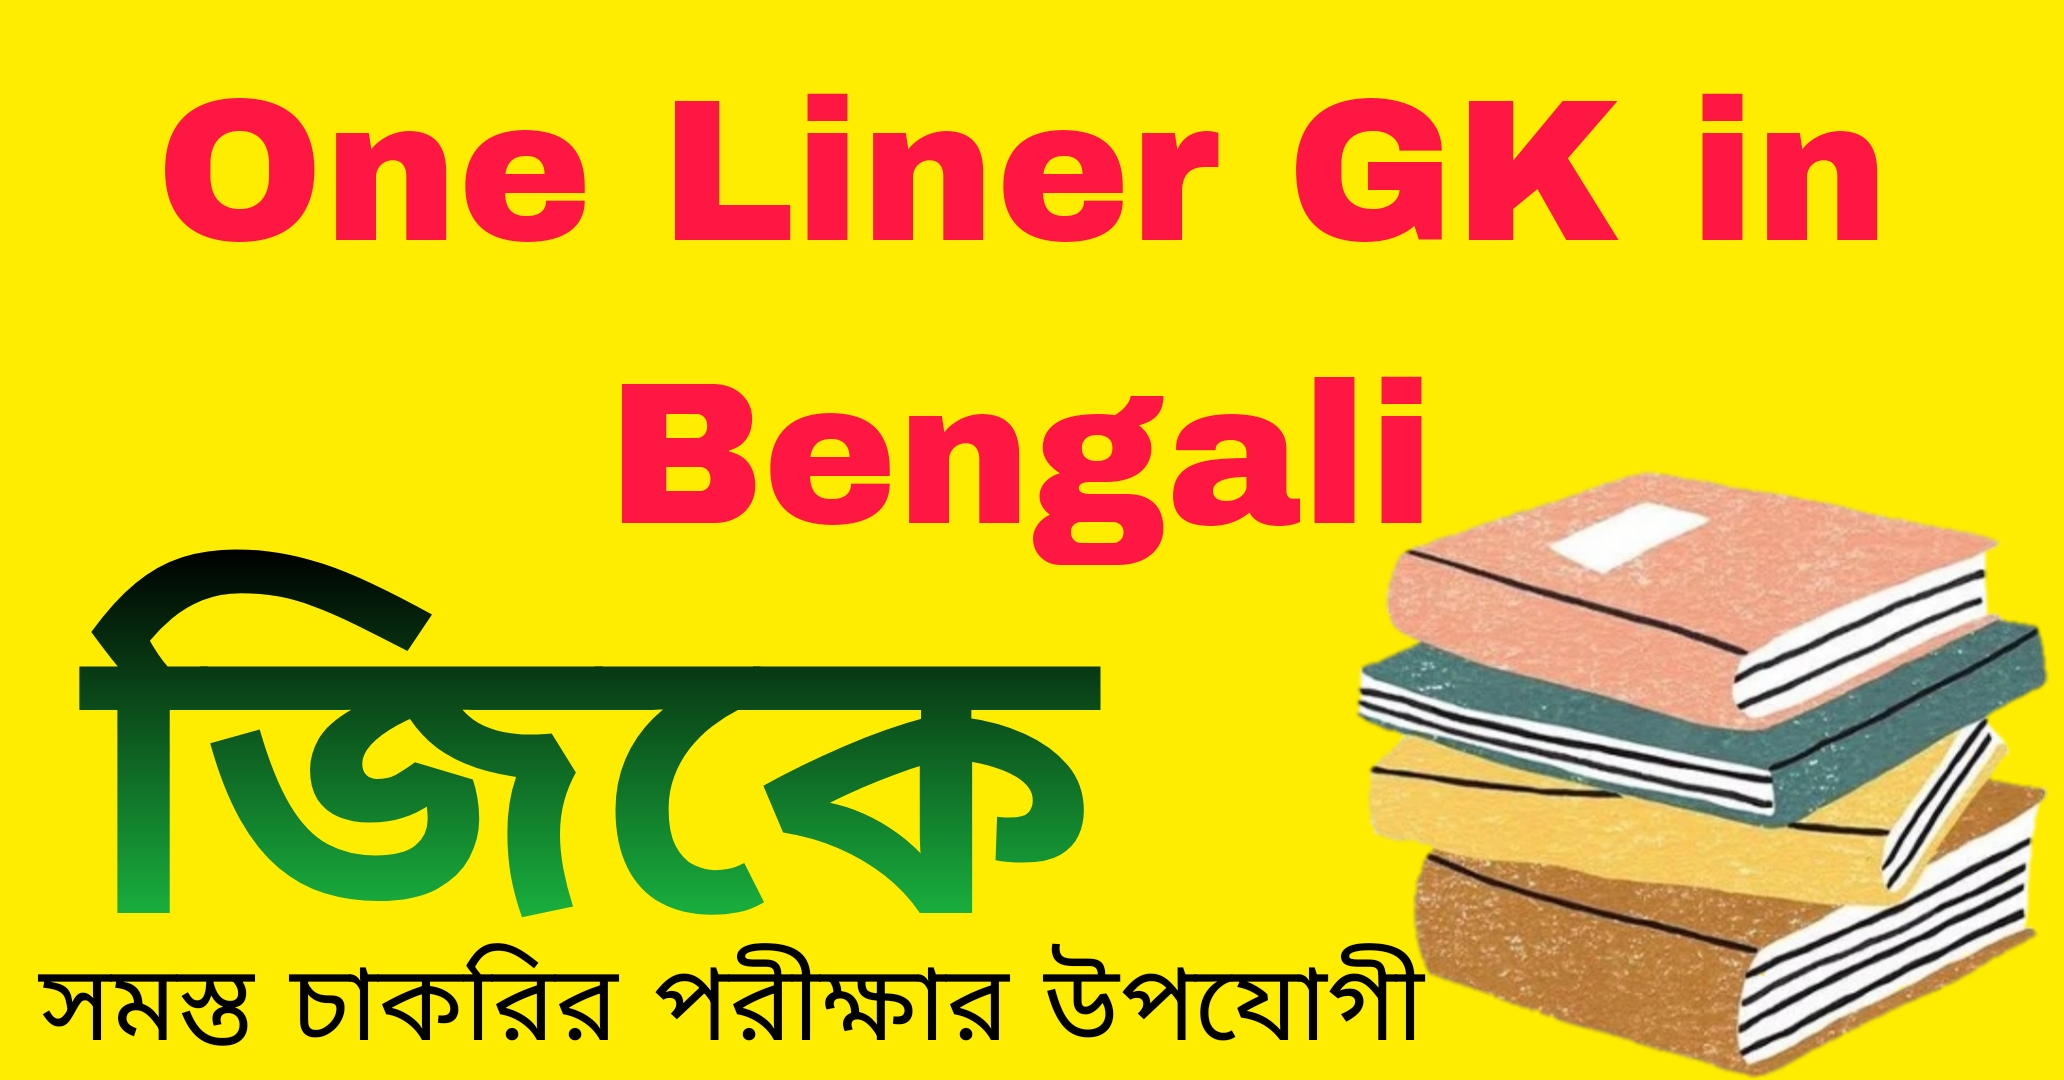 One Liner GK in Bengali PDF || Kiran One Liner Approach General Knowledge in Bengali